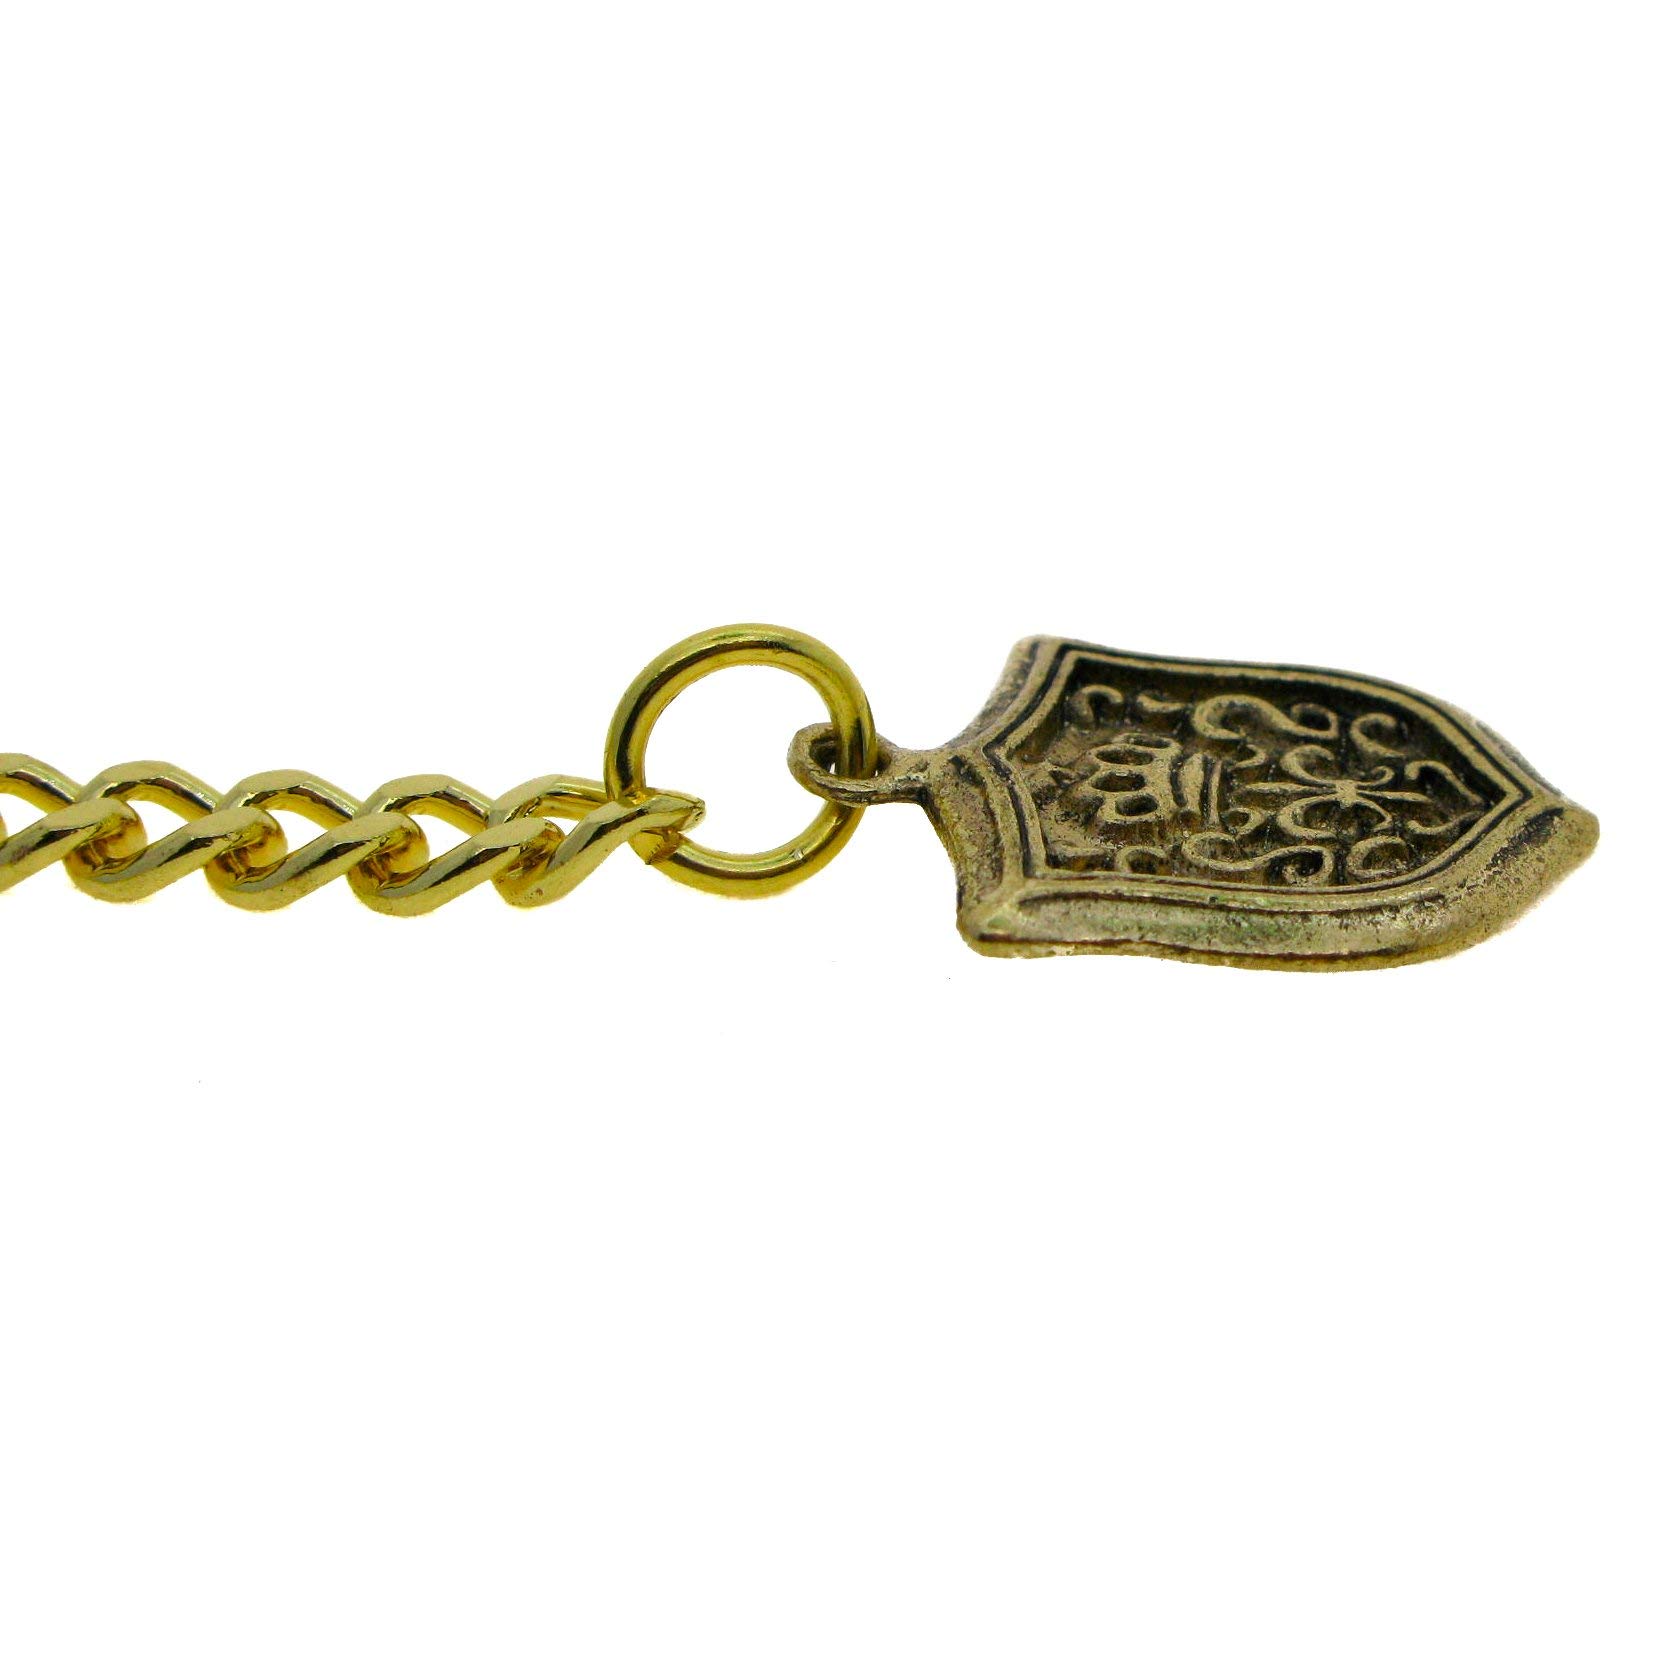 Albert Chain Gold Color Pocket Watch Chains for Men with T Bar Swivel Clasp and Ancient Shield Design Fob AC98